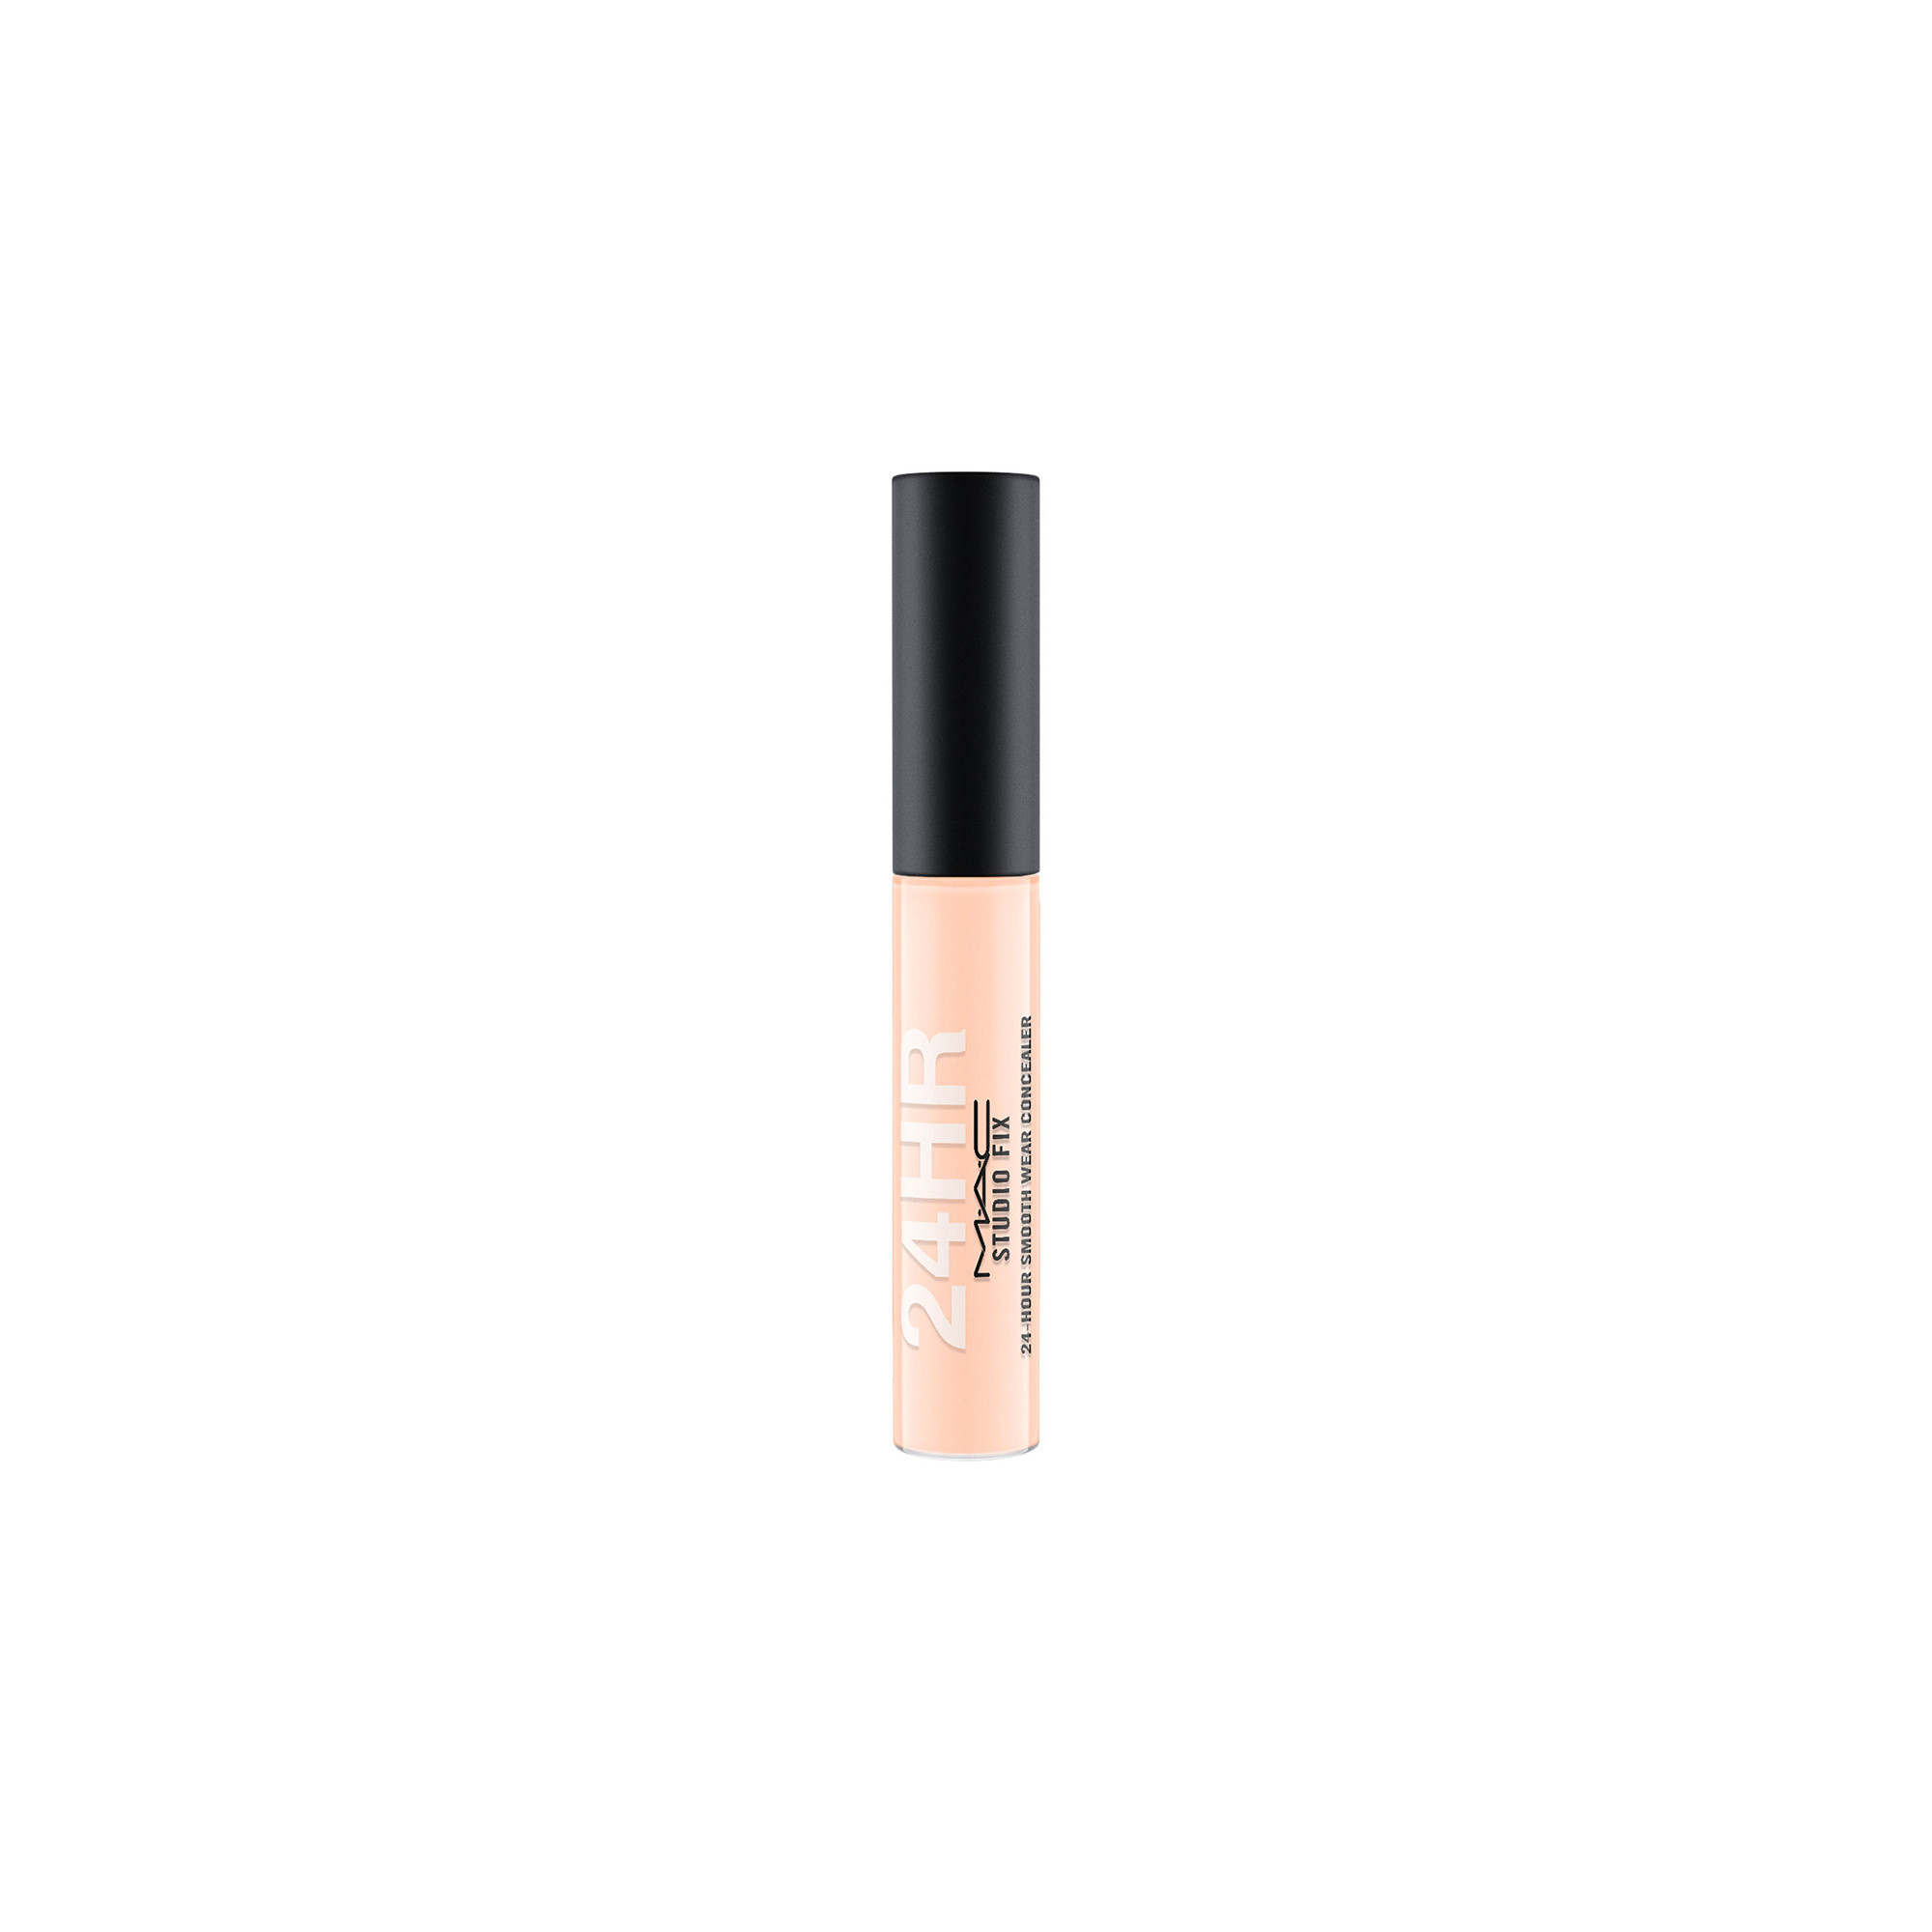 Studio Fix 24H Concealer - NW20, NW20, large